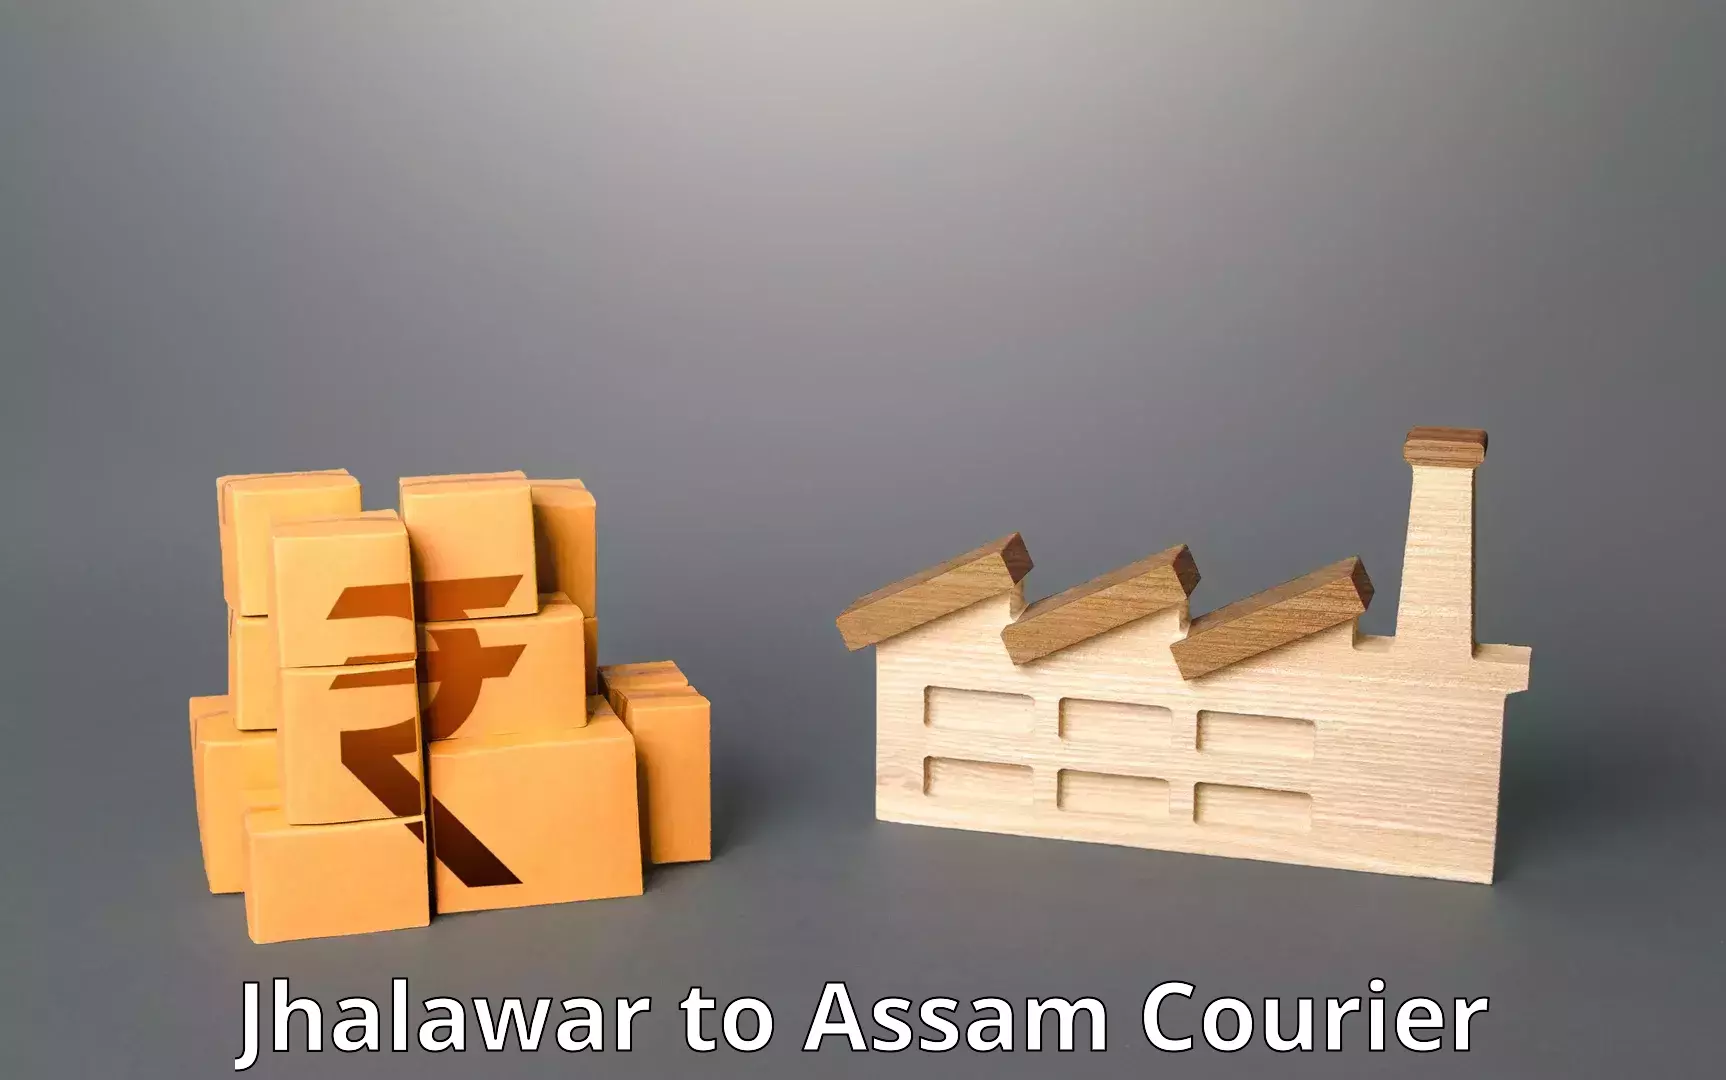 Sustainable shipping practices Jhalawar to Assam